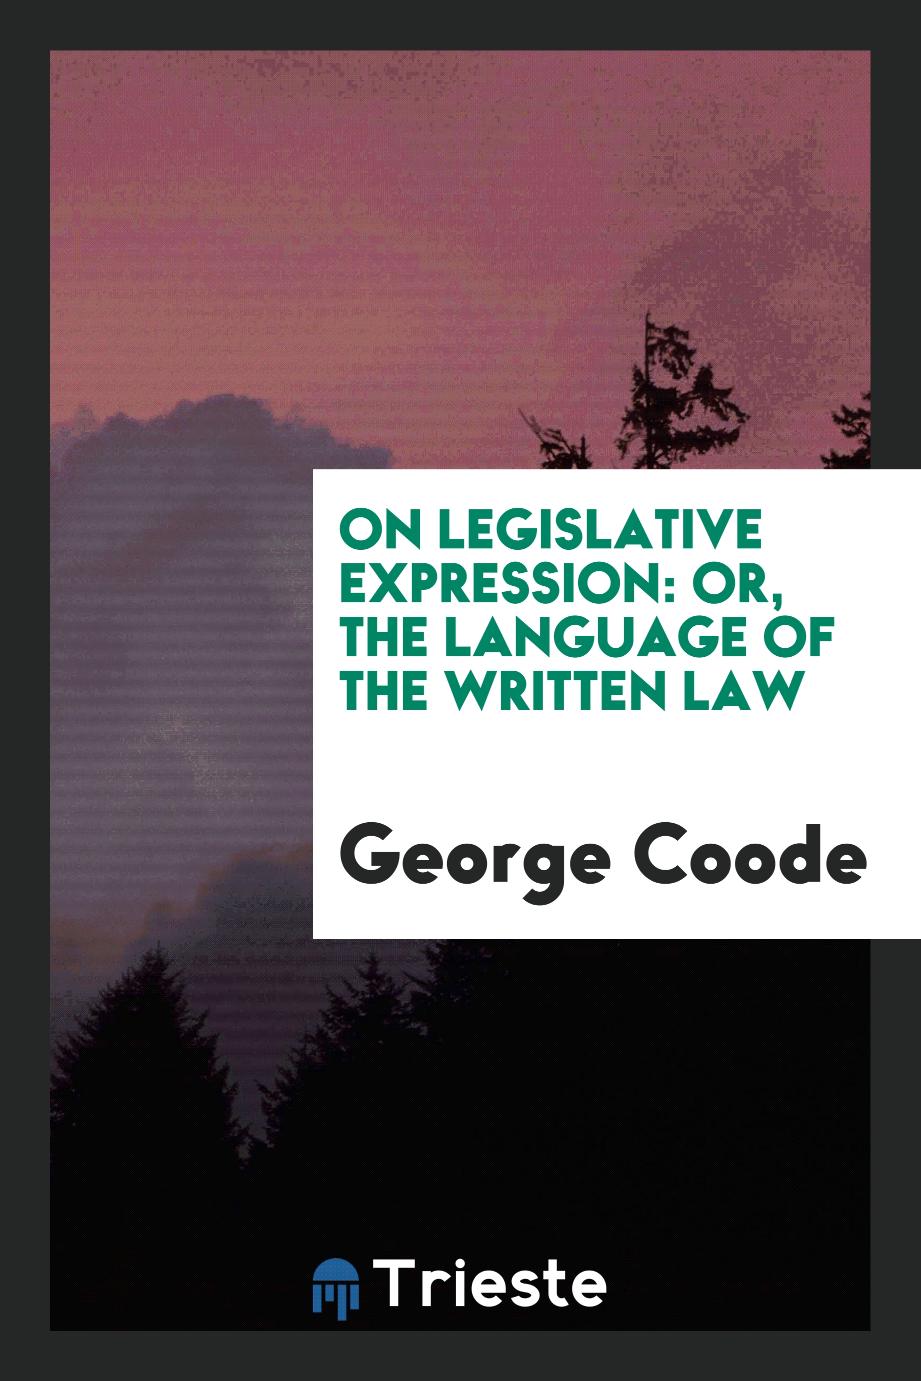 On Legislative Expression: or, The Language of the Written Law